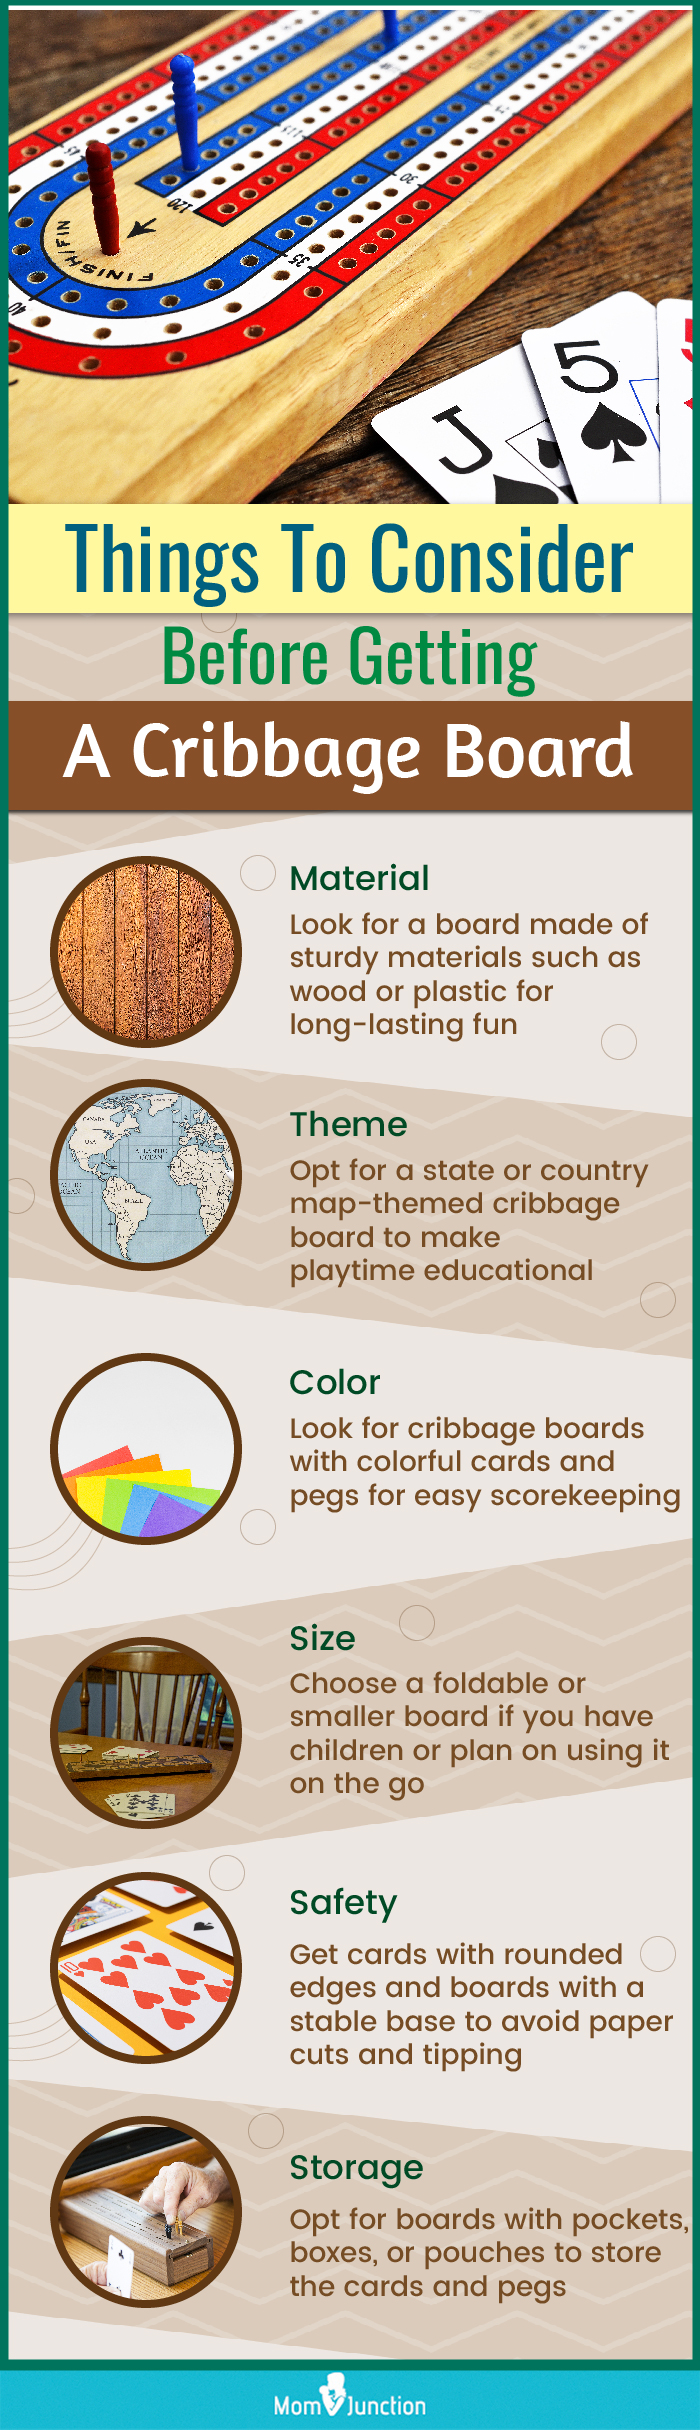 Things To Consider Before Getting A Cribbage Board (infographic)